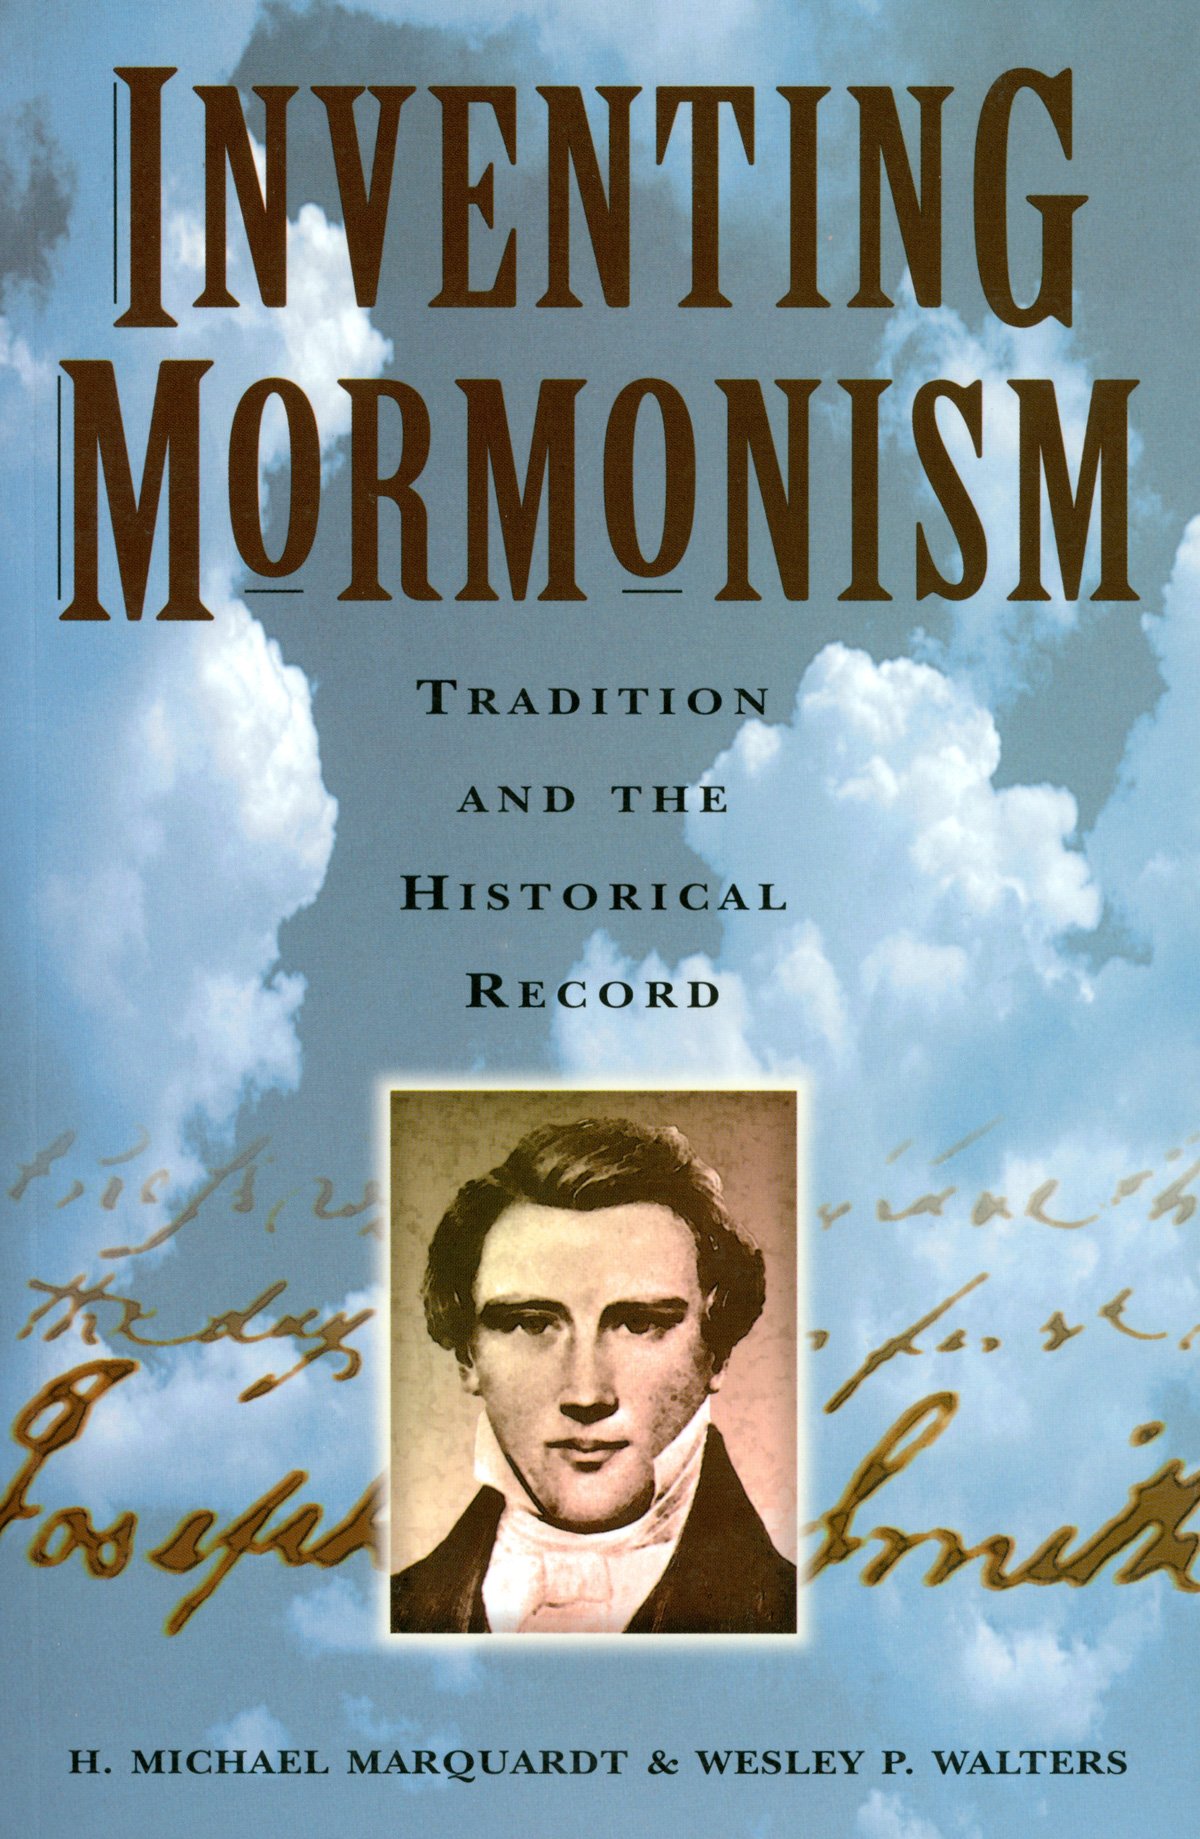 H. Michael Marquardt & Wesley P. Walters, Inventing Mormonism: Tradition & the Historical Record